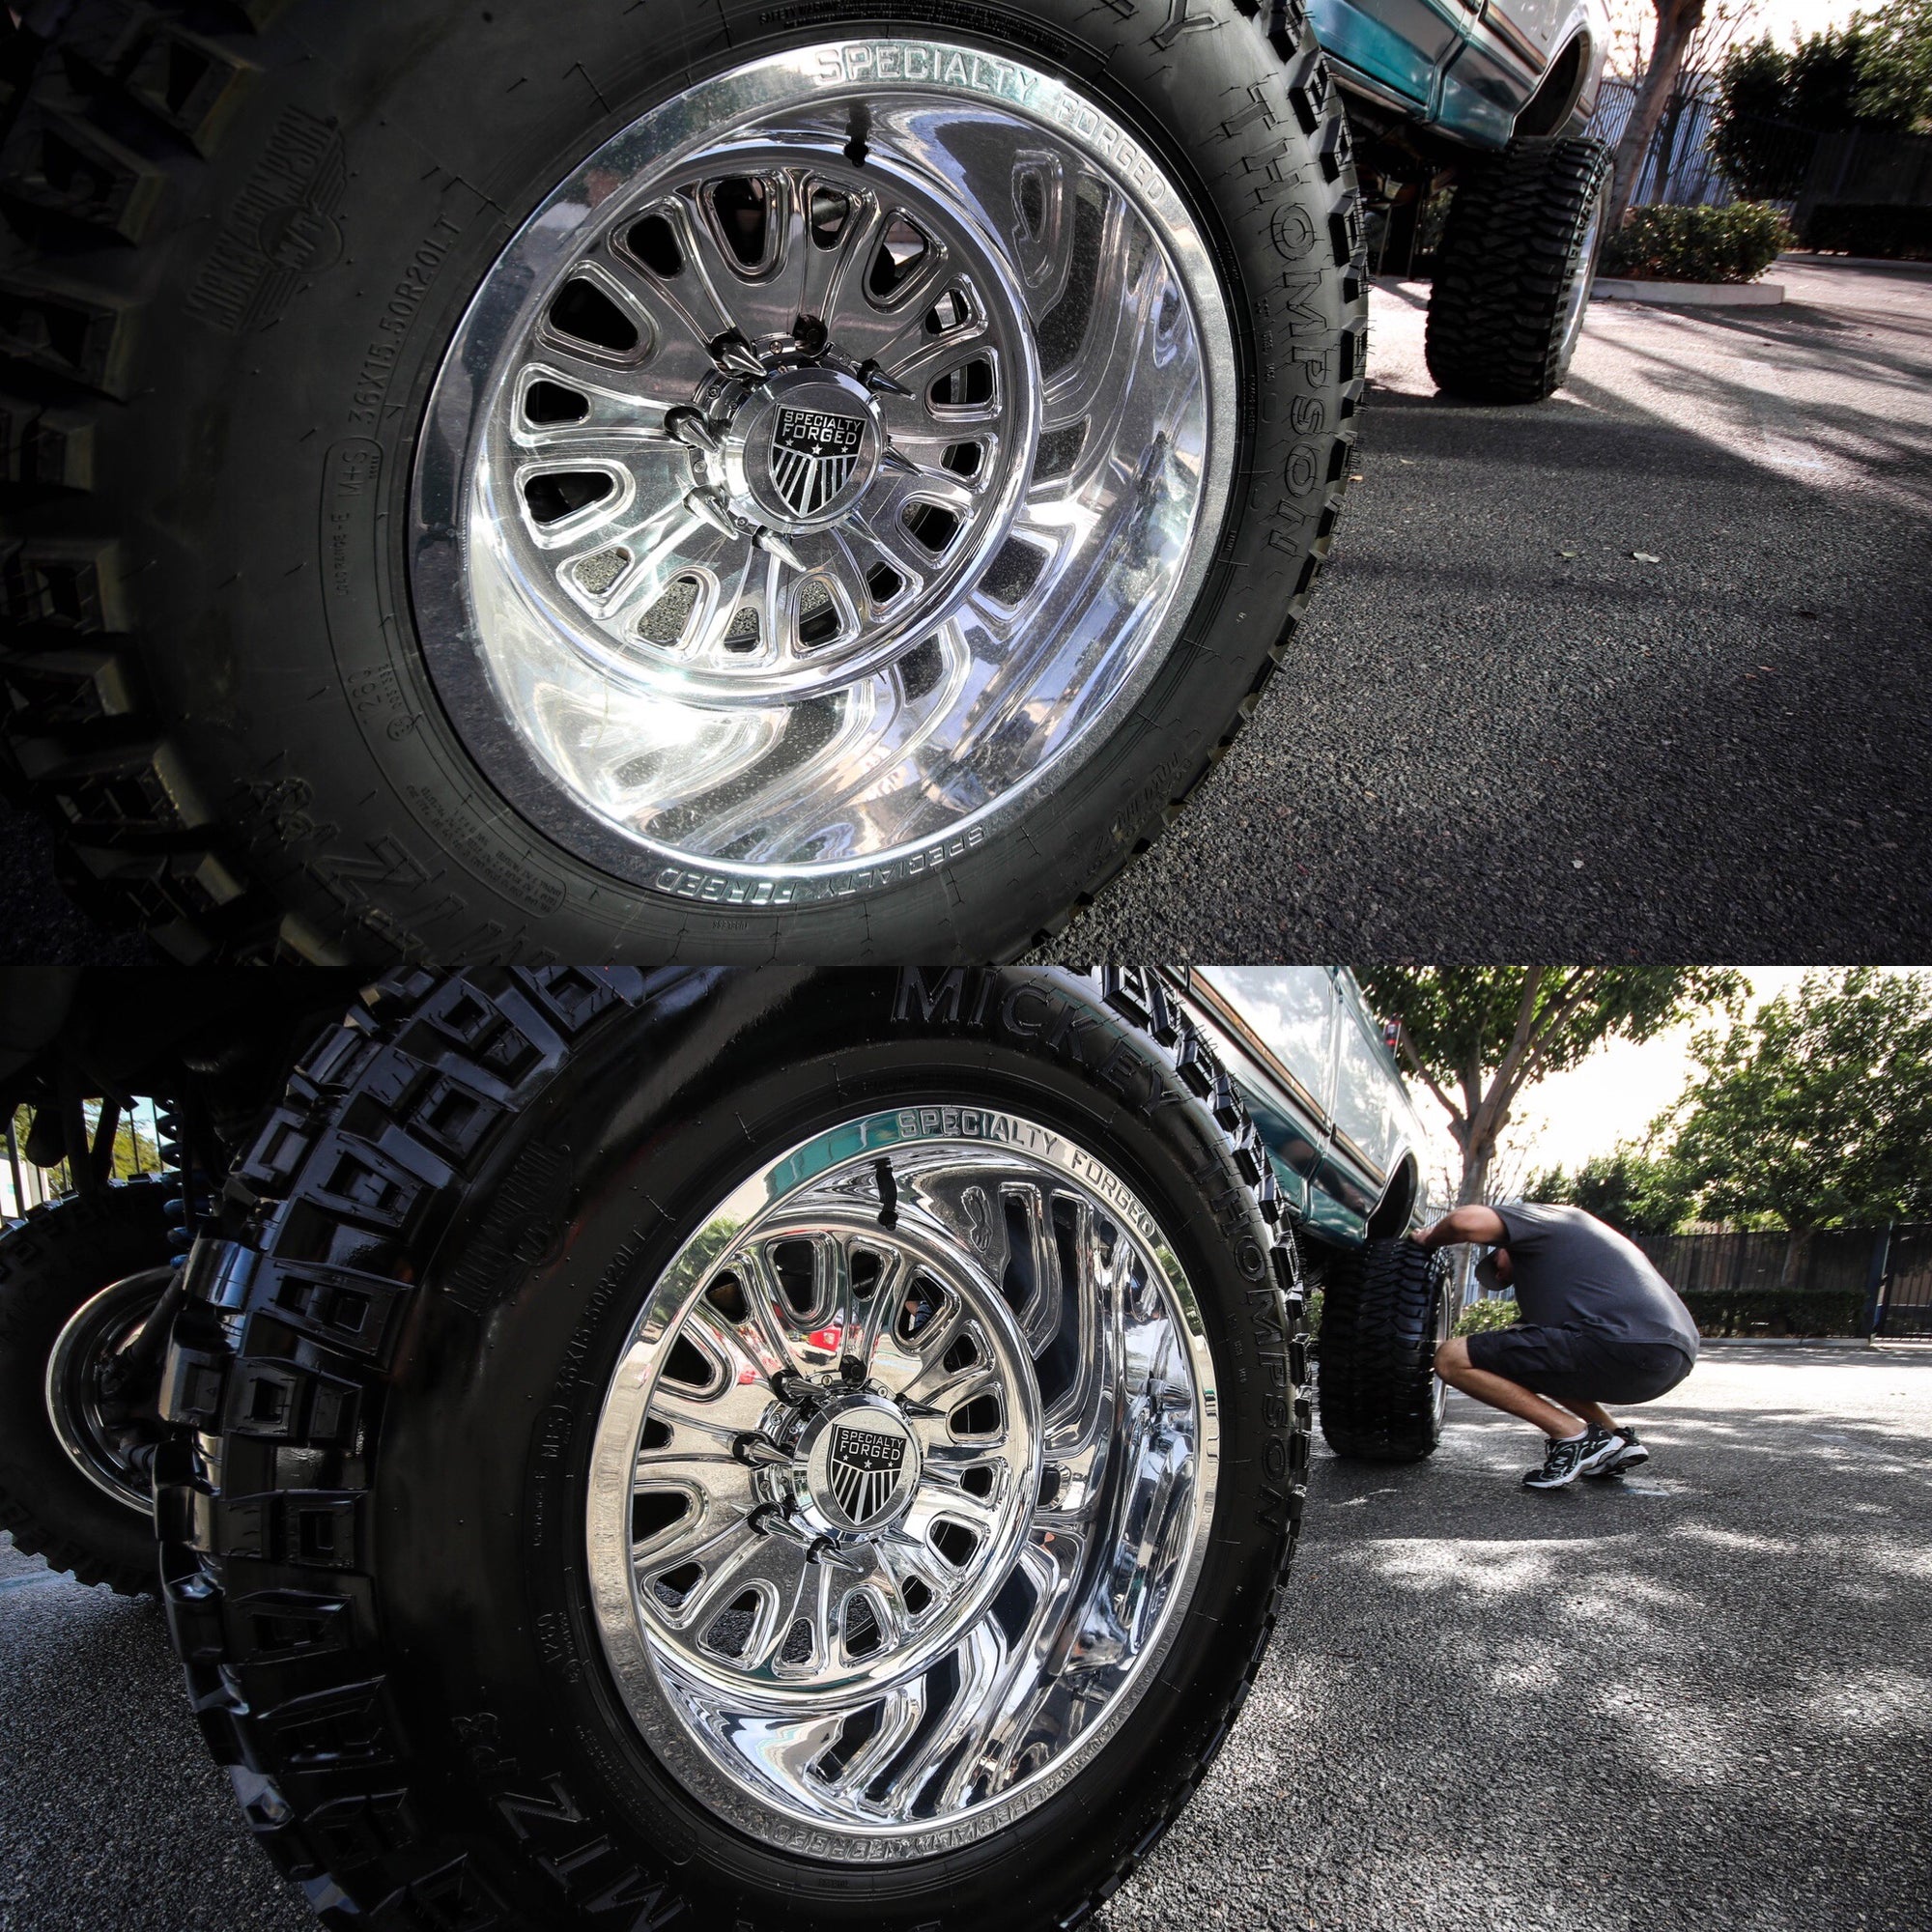 How to polish Forged / Billet Wheels on on lifted trucks